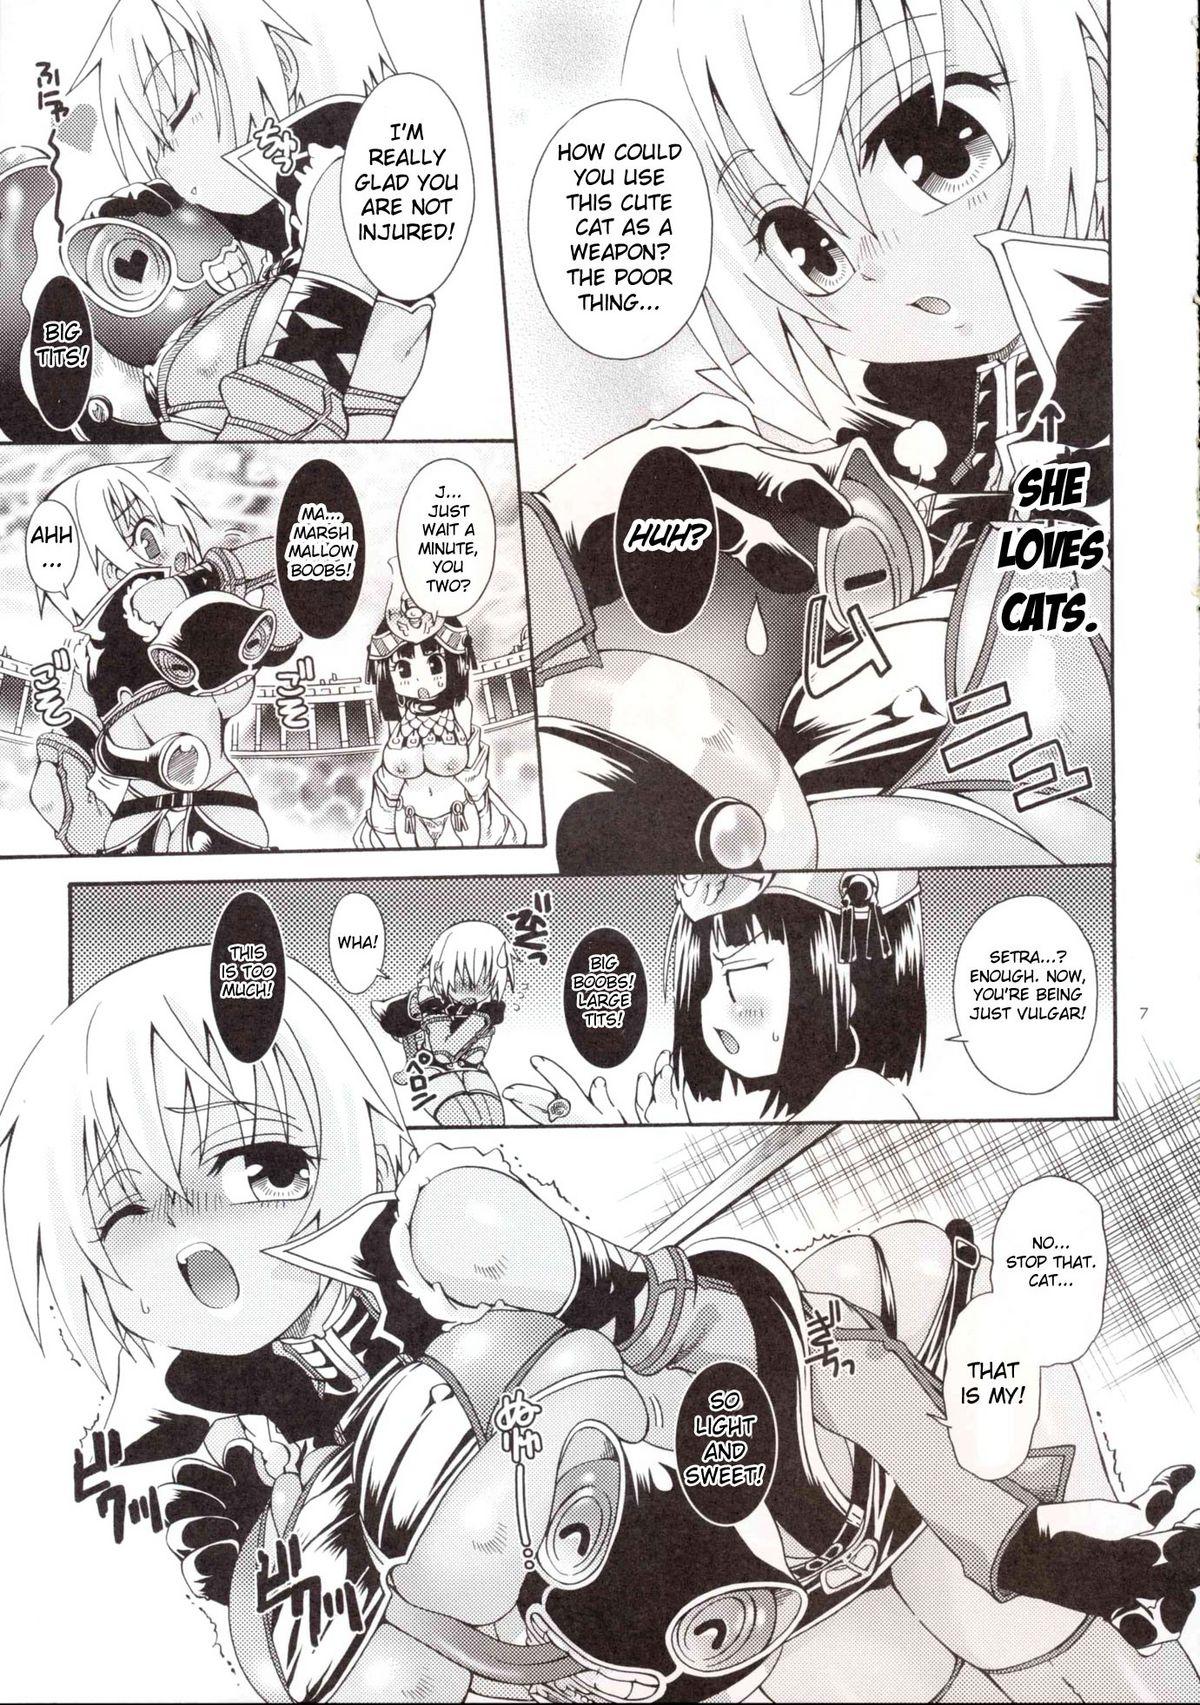 Great Fuck Cat Fight Over Drive - Queens blade Tetas - Page 6